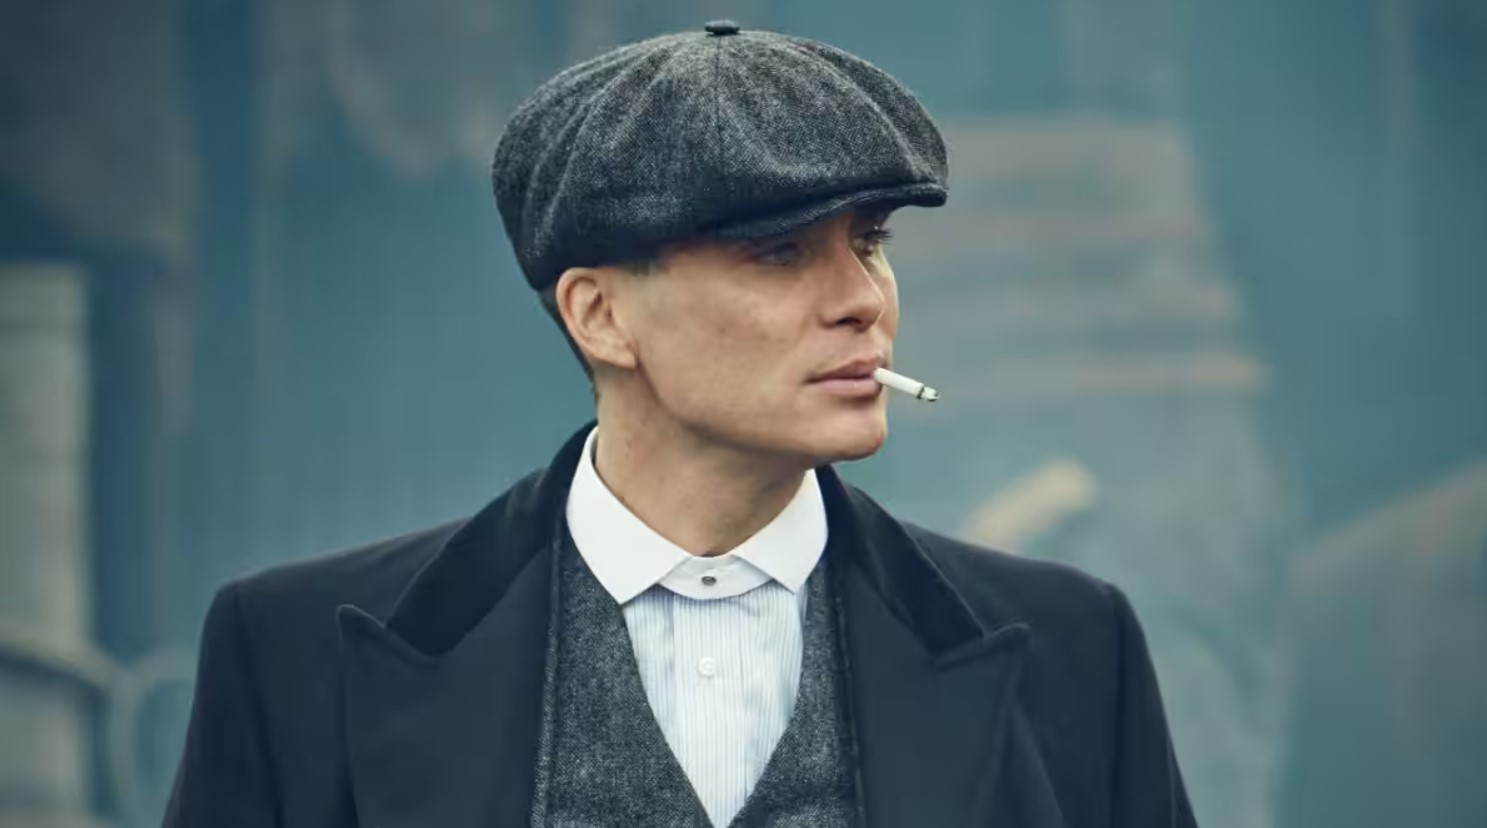 Cillian Murphy's Surprise Take on Playing Bond: What's Next with Nolan?